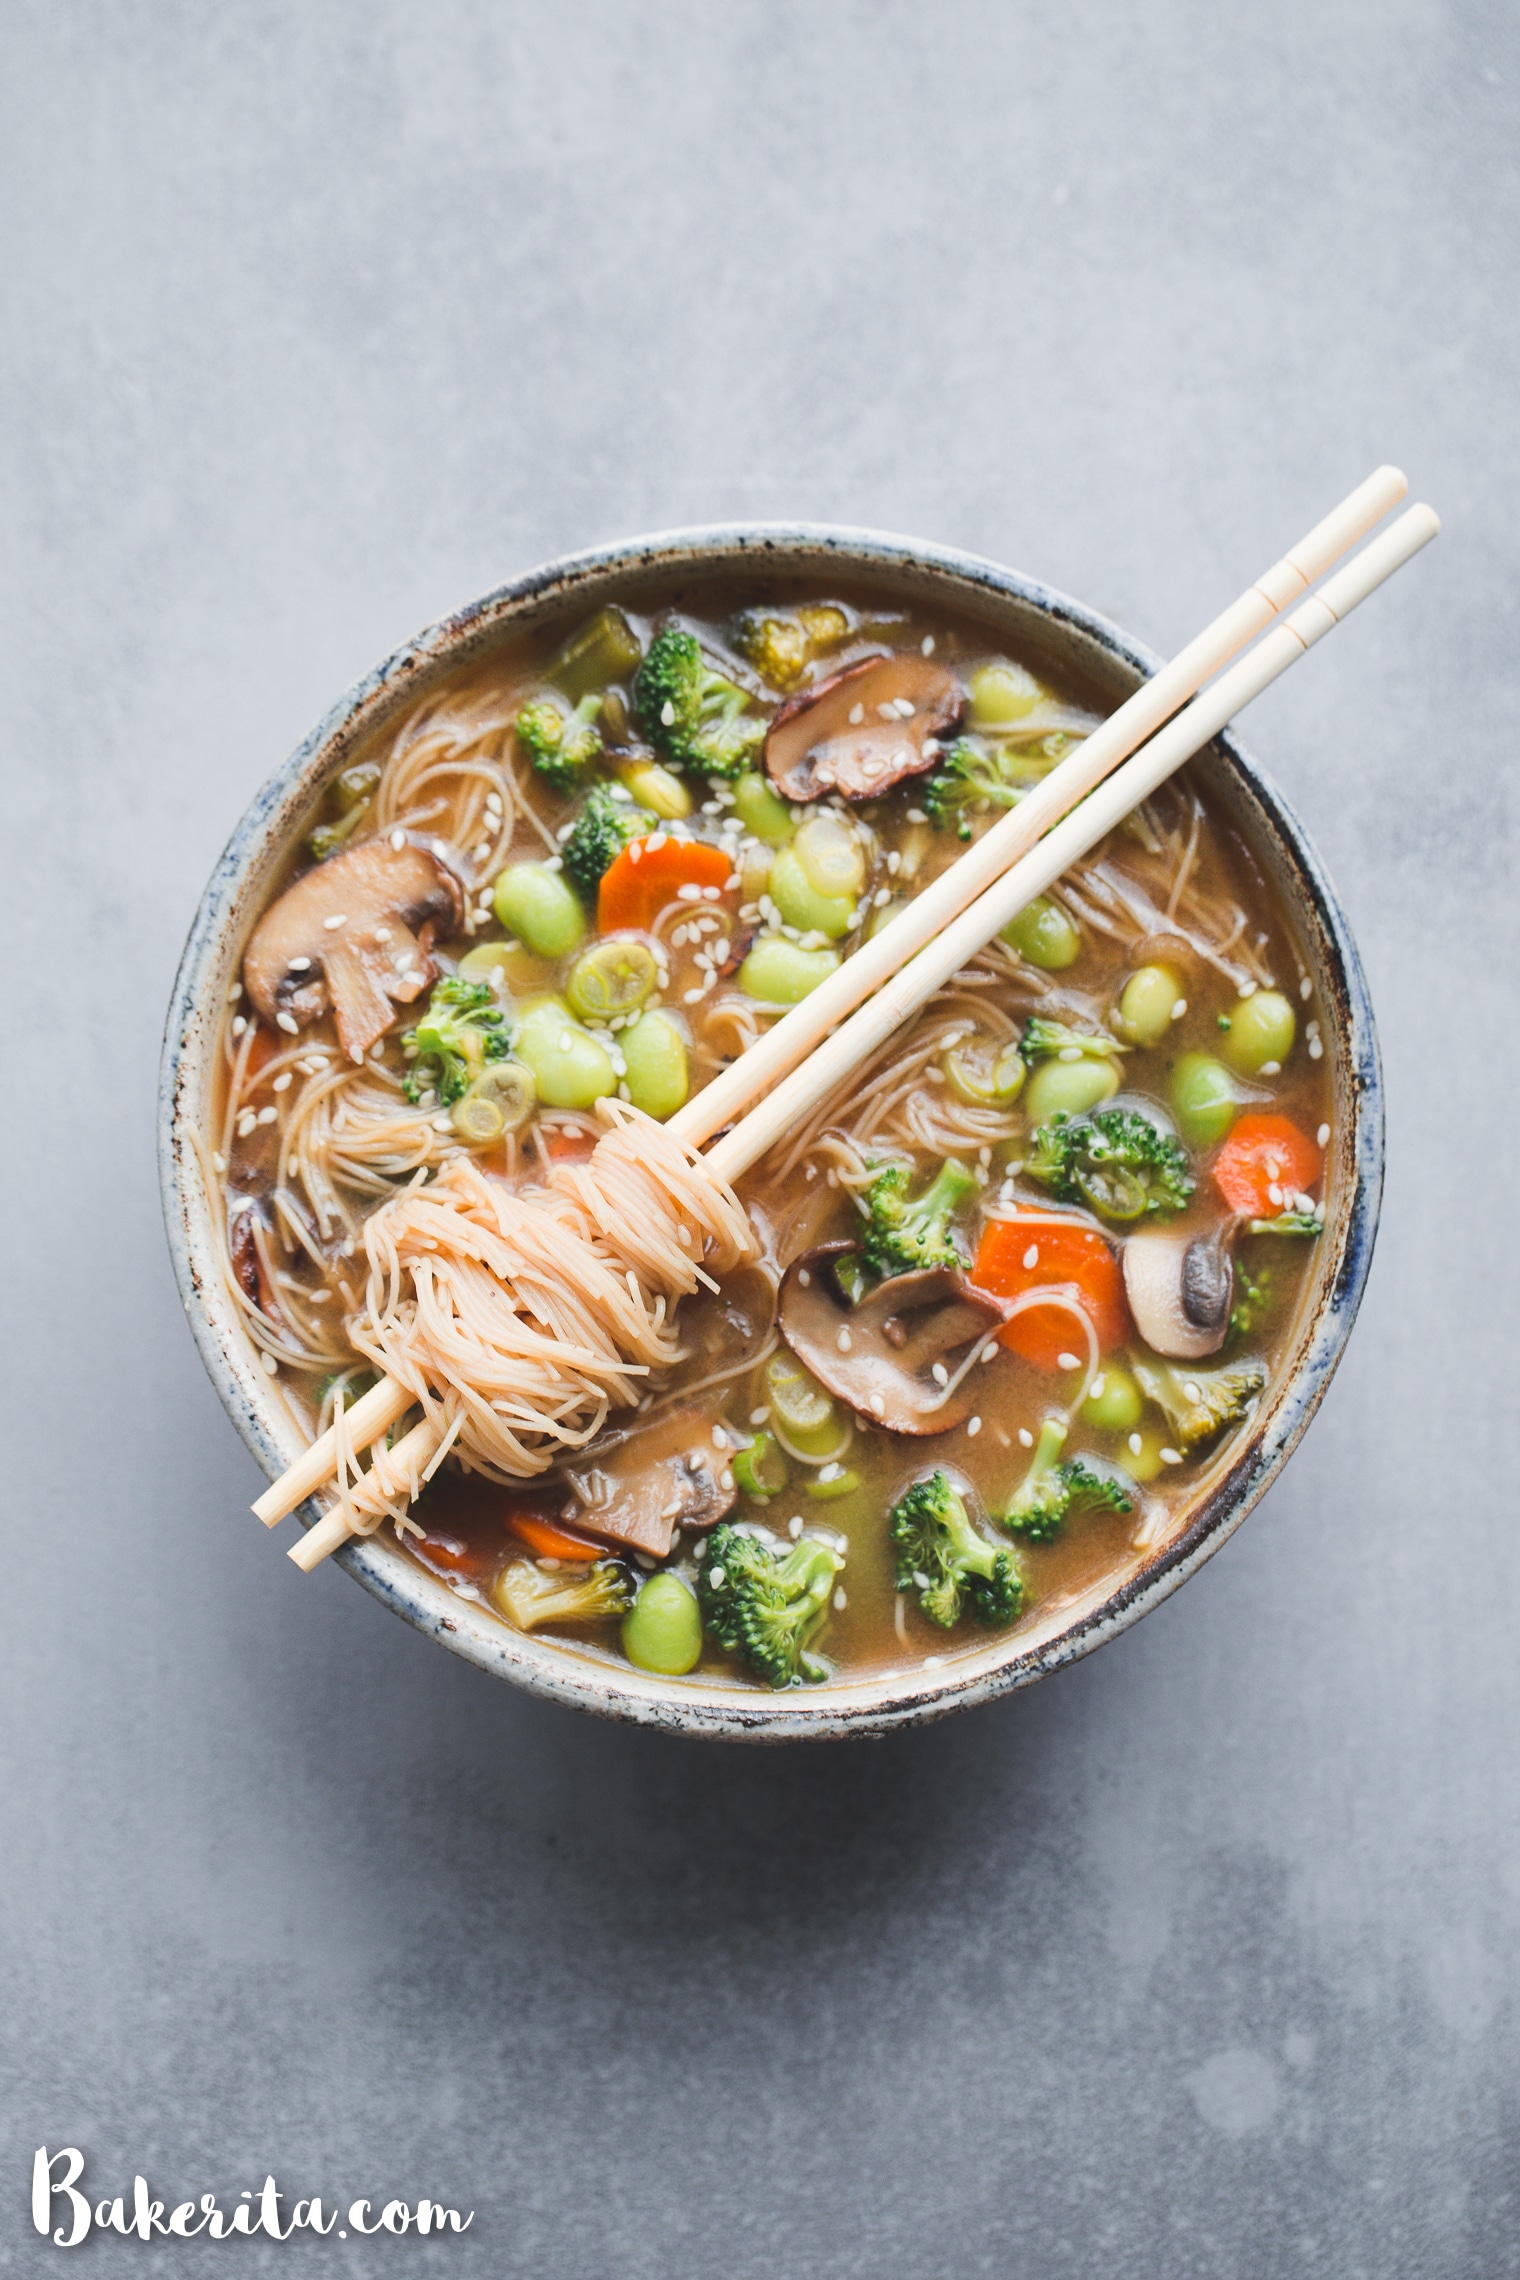 Make this easy Gluten-Free & Vegan Vegetable Noodle Miso Soup for dinner tonight! It's simple to make in under 30 minutes and irresistibly delicious. You can customize the soup with whatever vegetables you have on hand.